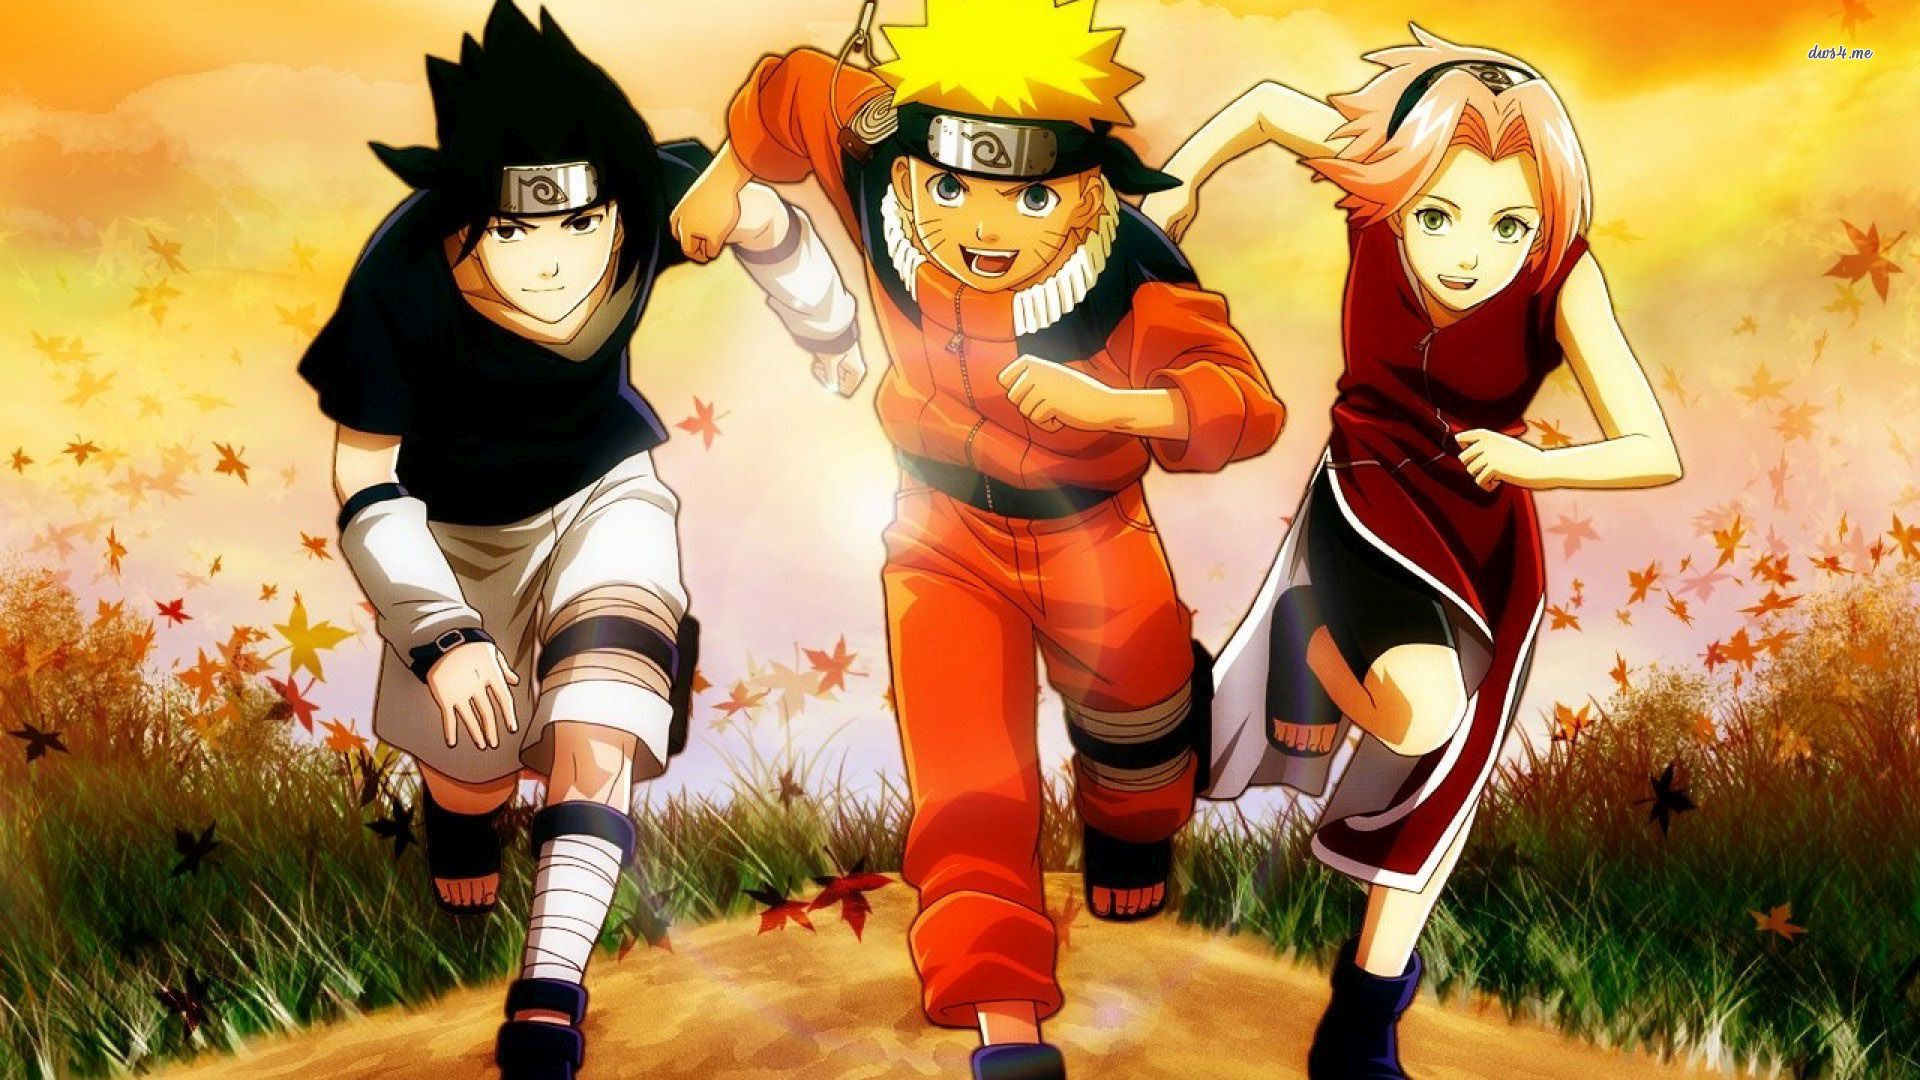 Naruto Wallpapers Pictures Images